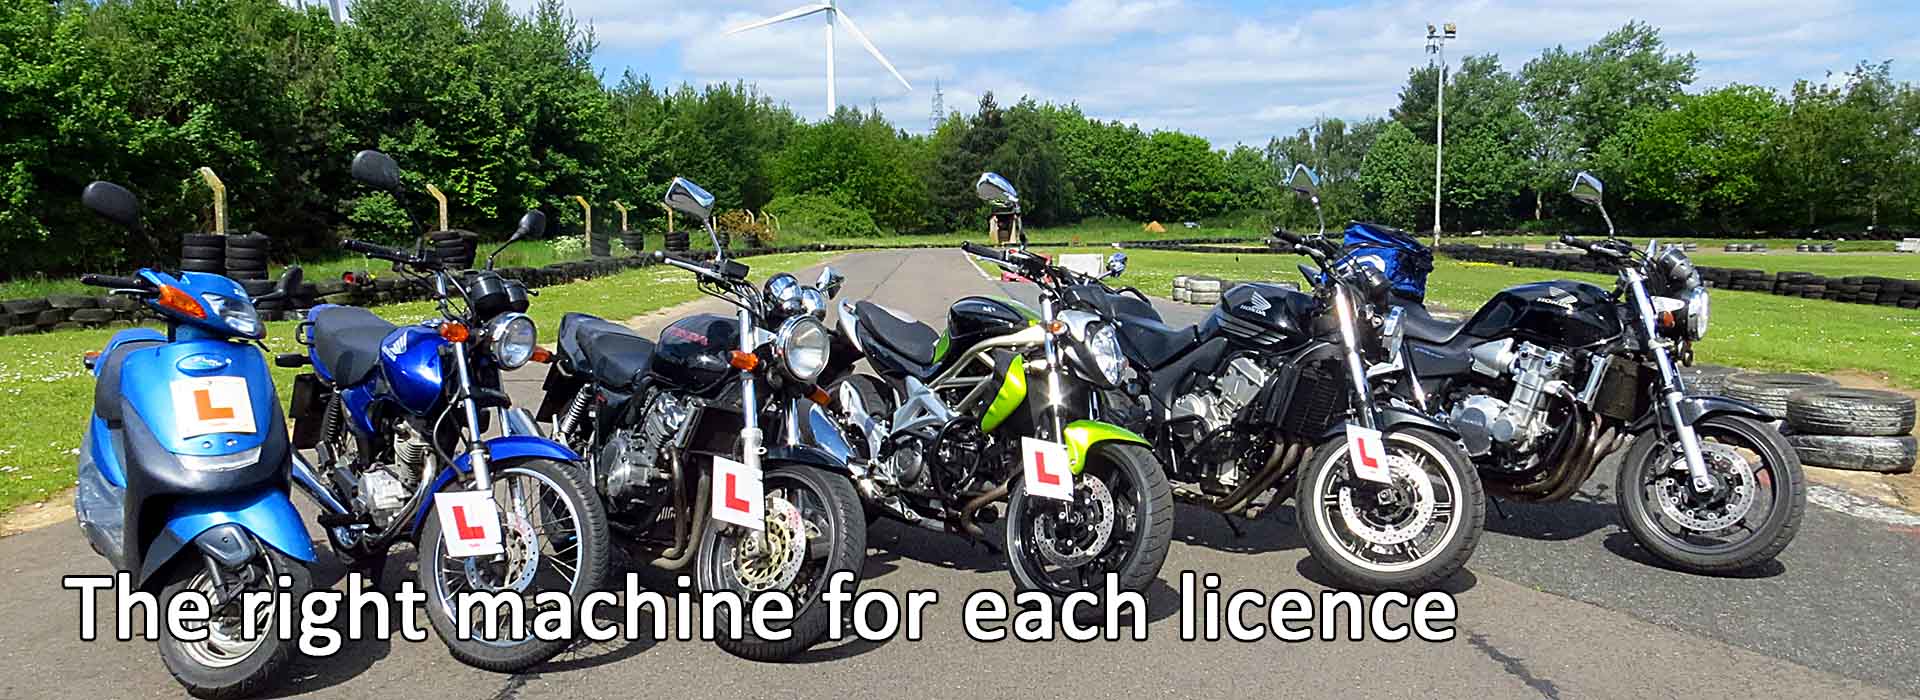 Anglia Training Services - CBT & Motorcycle Training in Norfolk